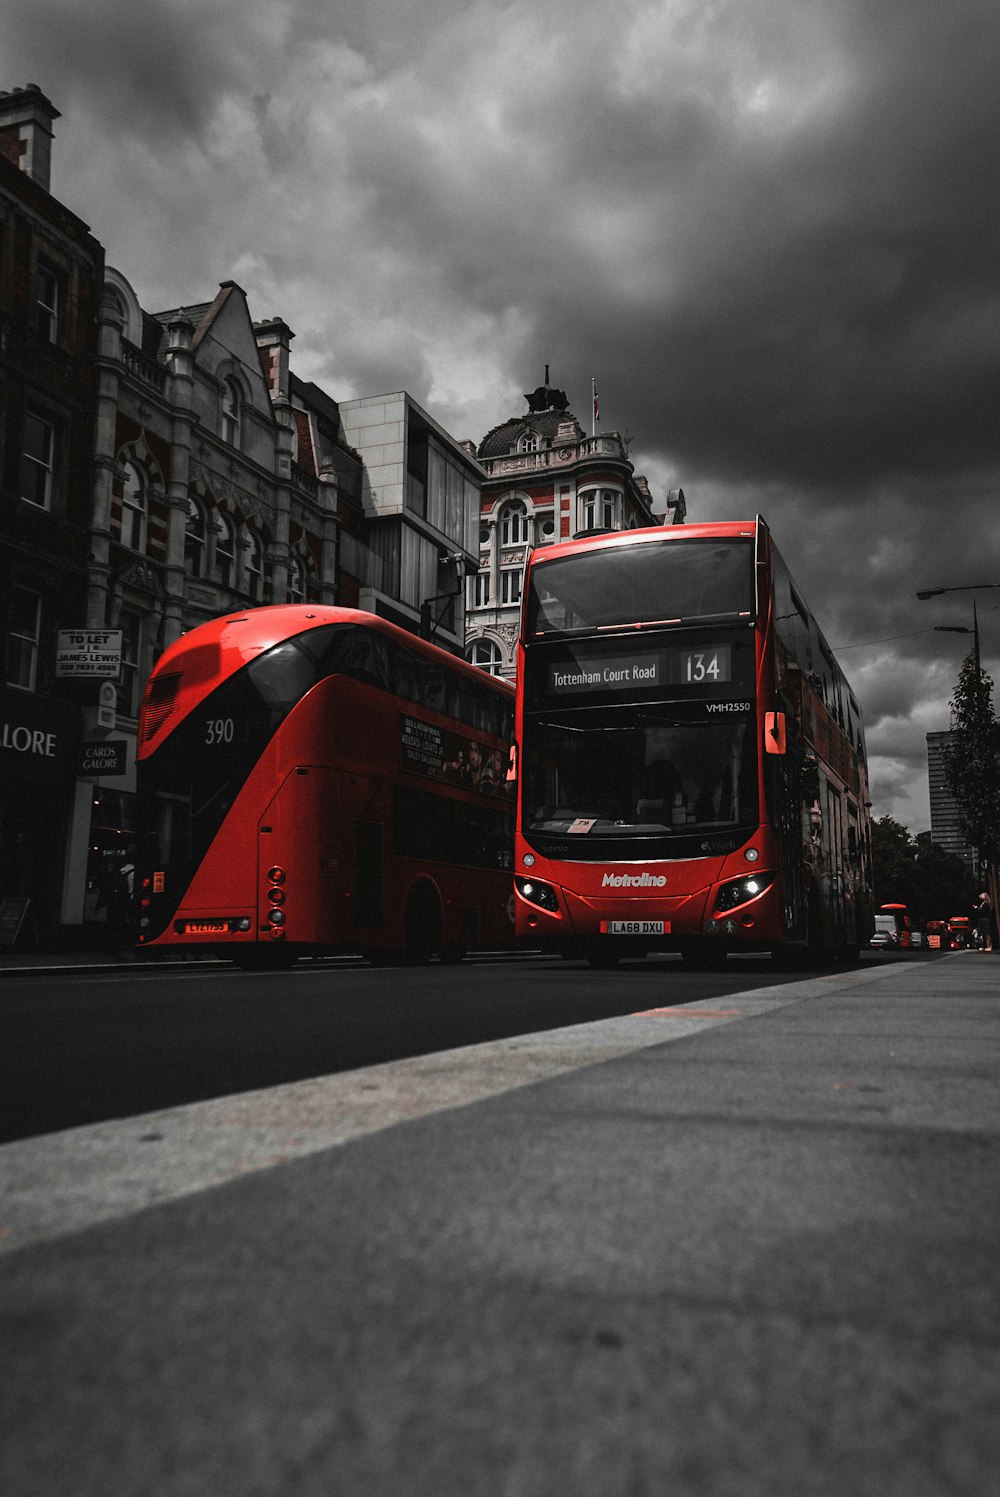 red and black bus on road near concrete buildings